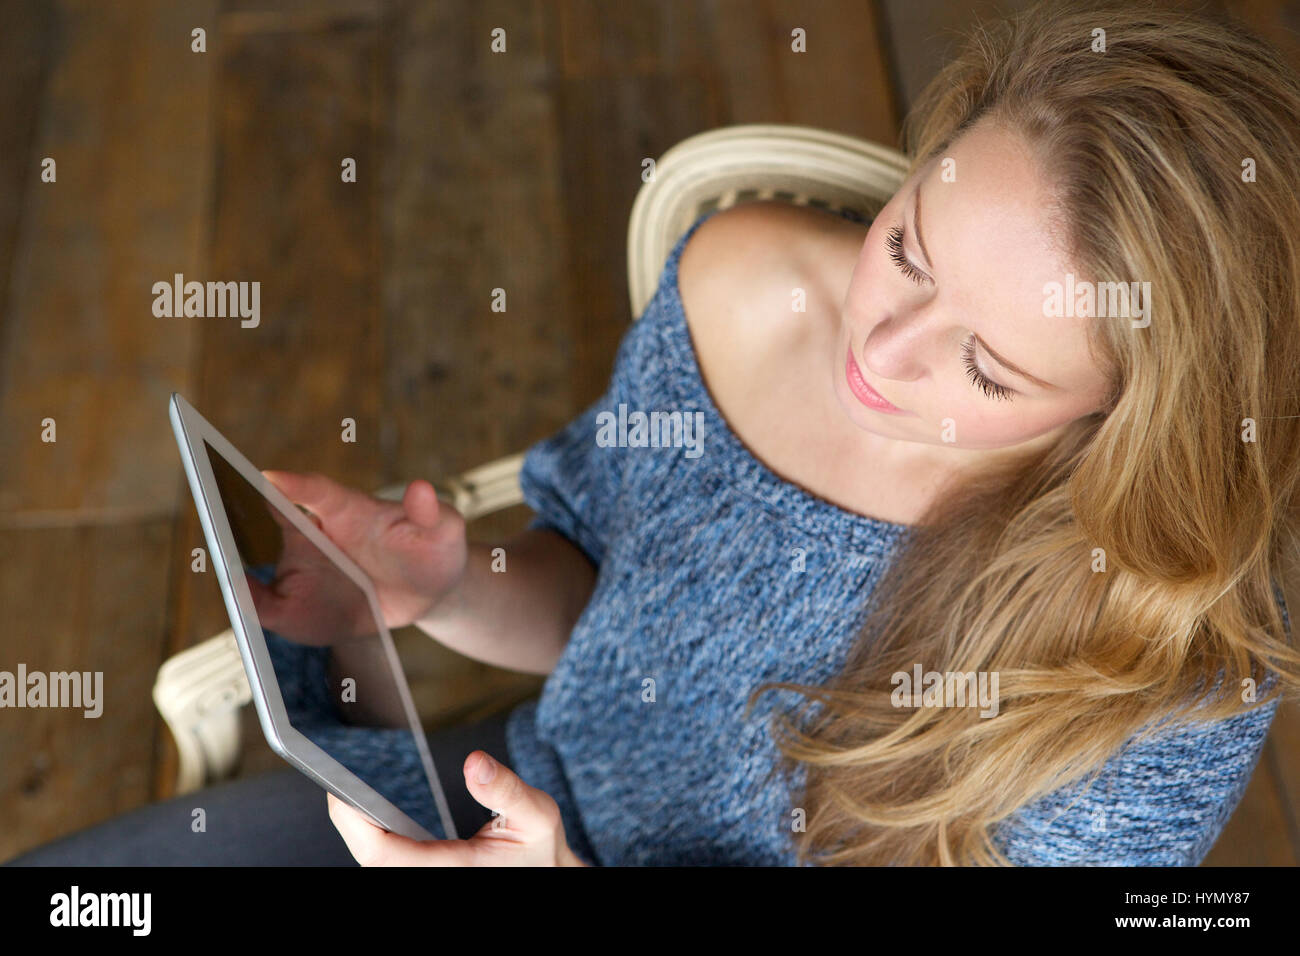 Portrait of a woman learning how to use touchscreen tablet Stock Photo